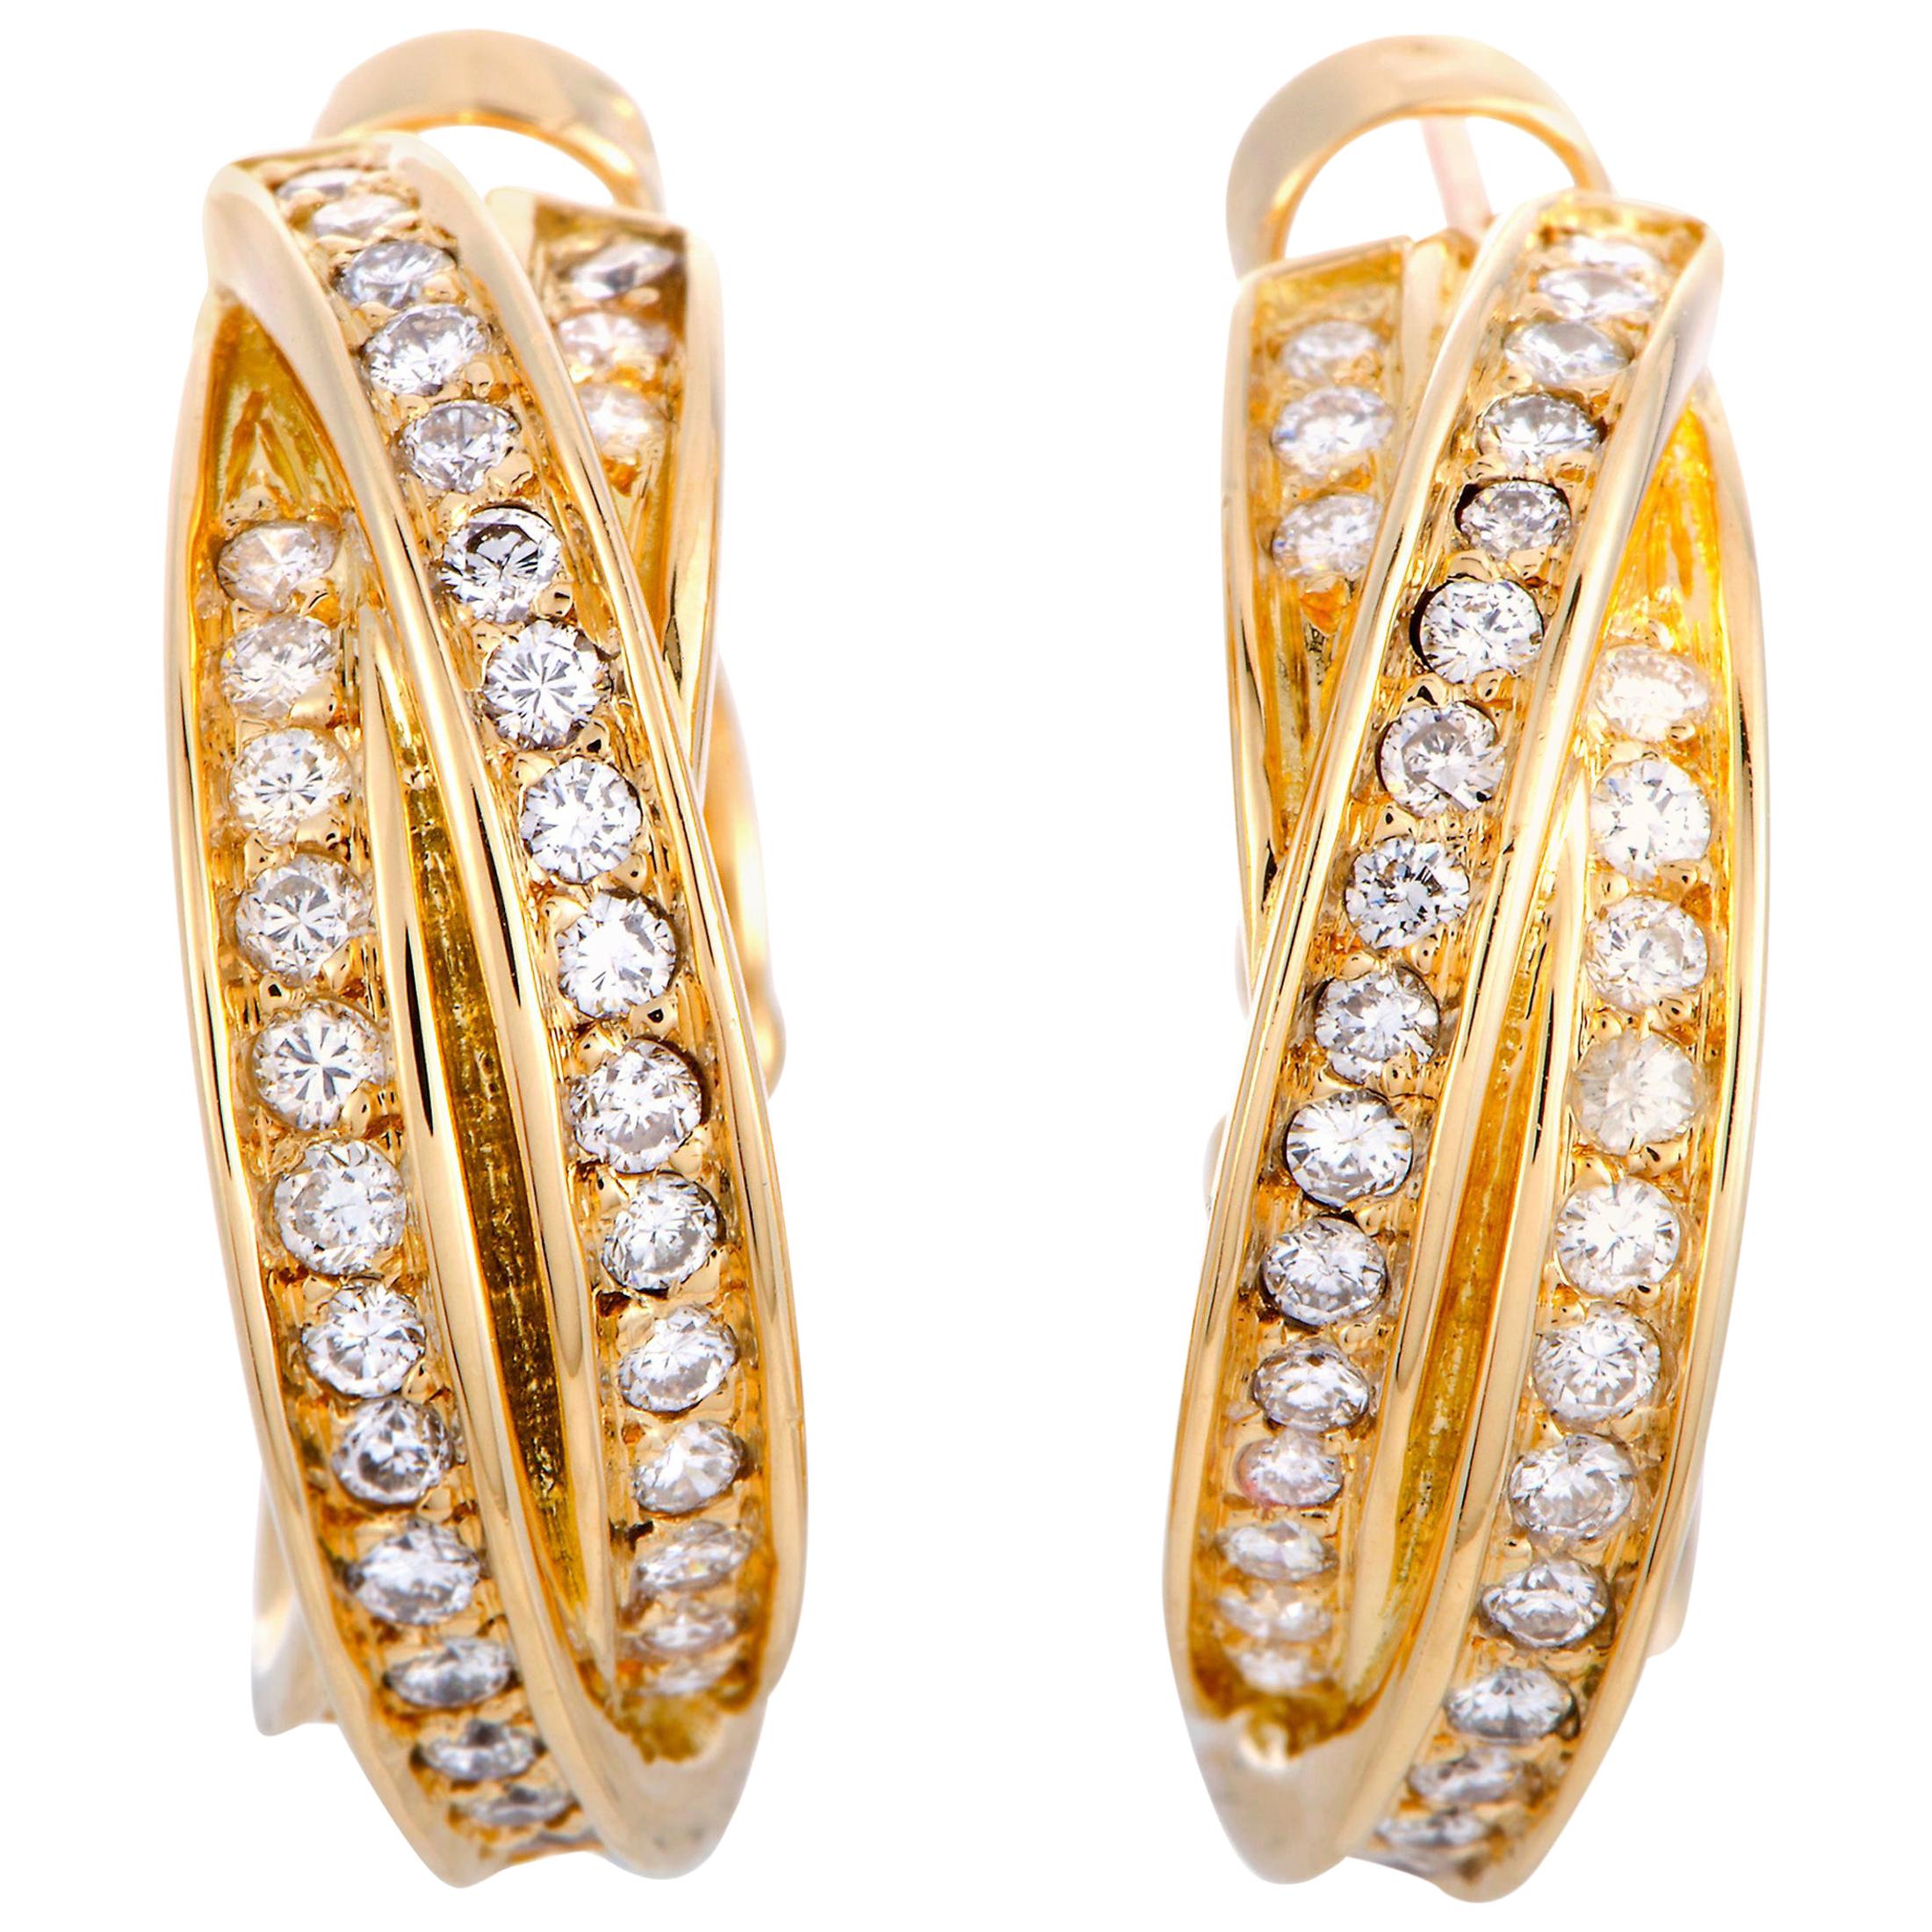 The Cartier “Trinity” earrings are made out of 18K yellow gold and diamonds and each of the two earrings weighs 7.35 grams, measuring 0.81” in length and 0.25” in width.

This pair of earrings is offered in estate condition and includes the